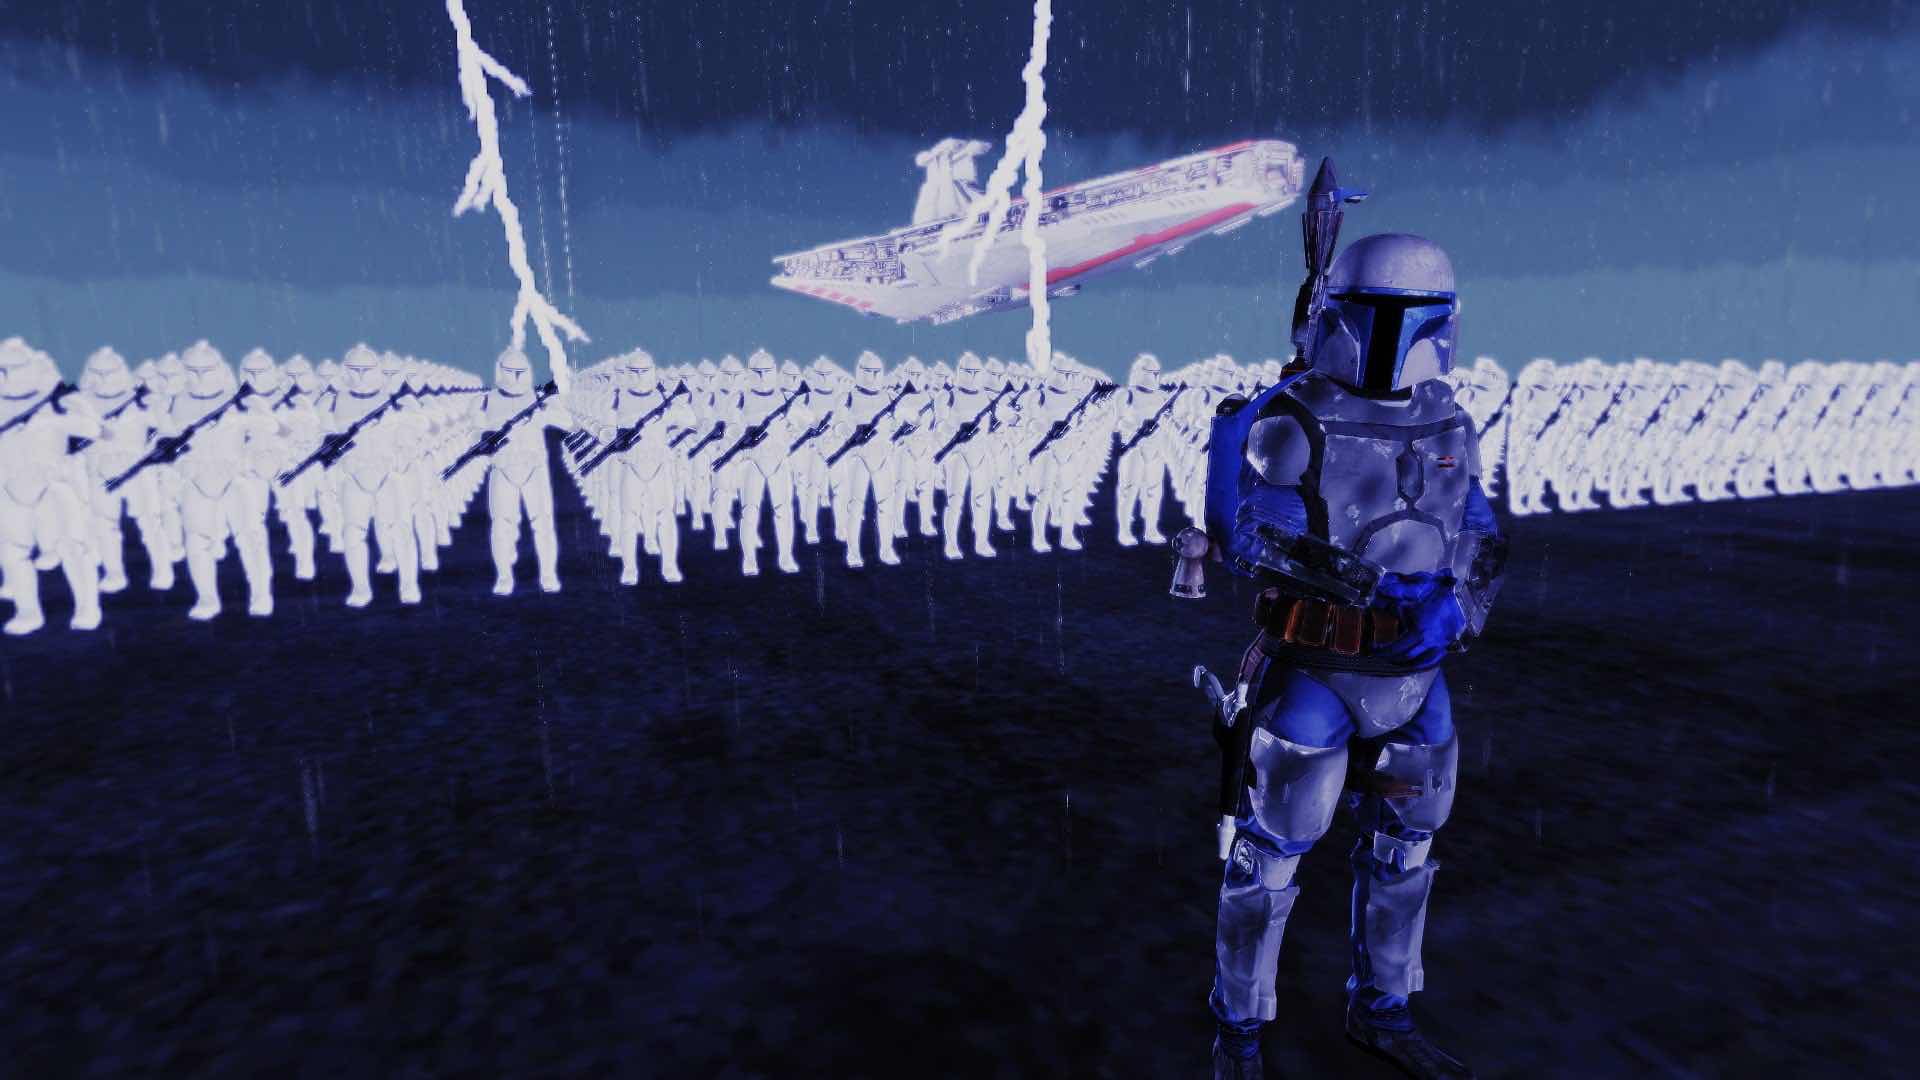 AT-AT Rampages in ARMA 3 Star Wars Mod